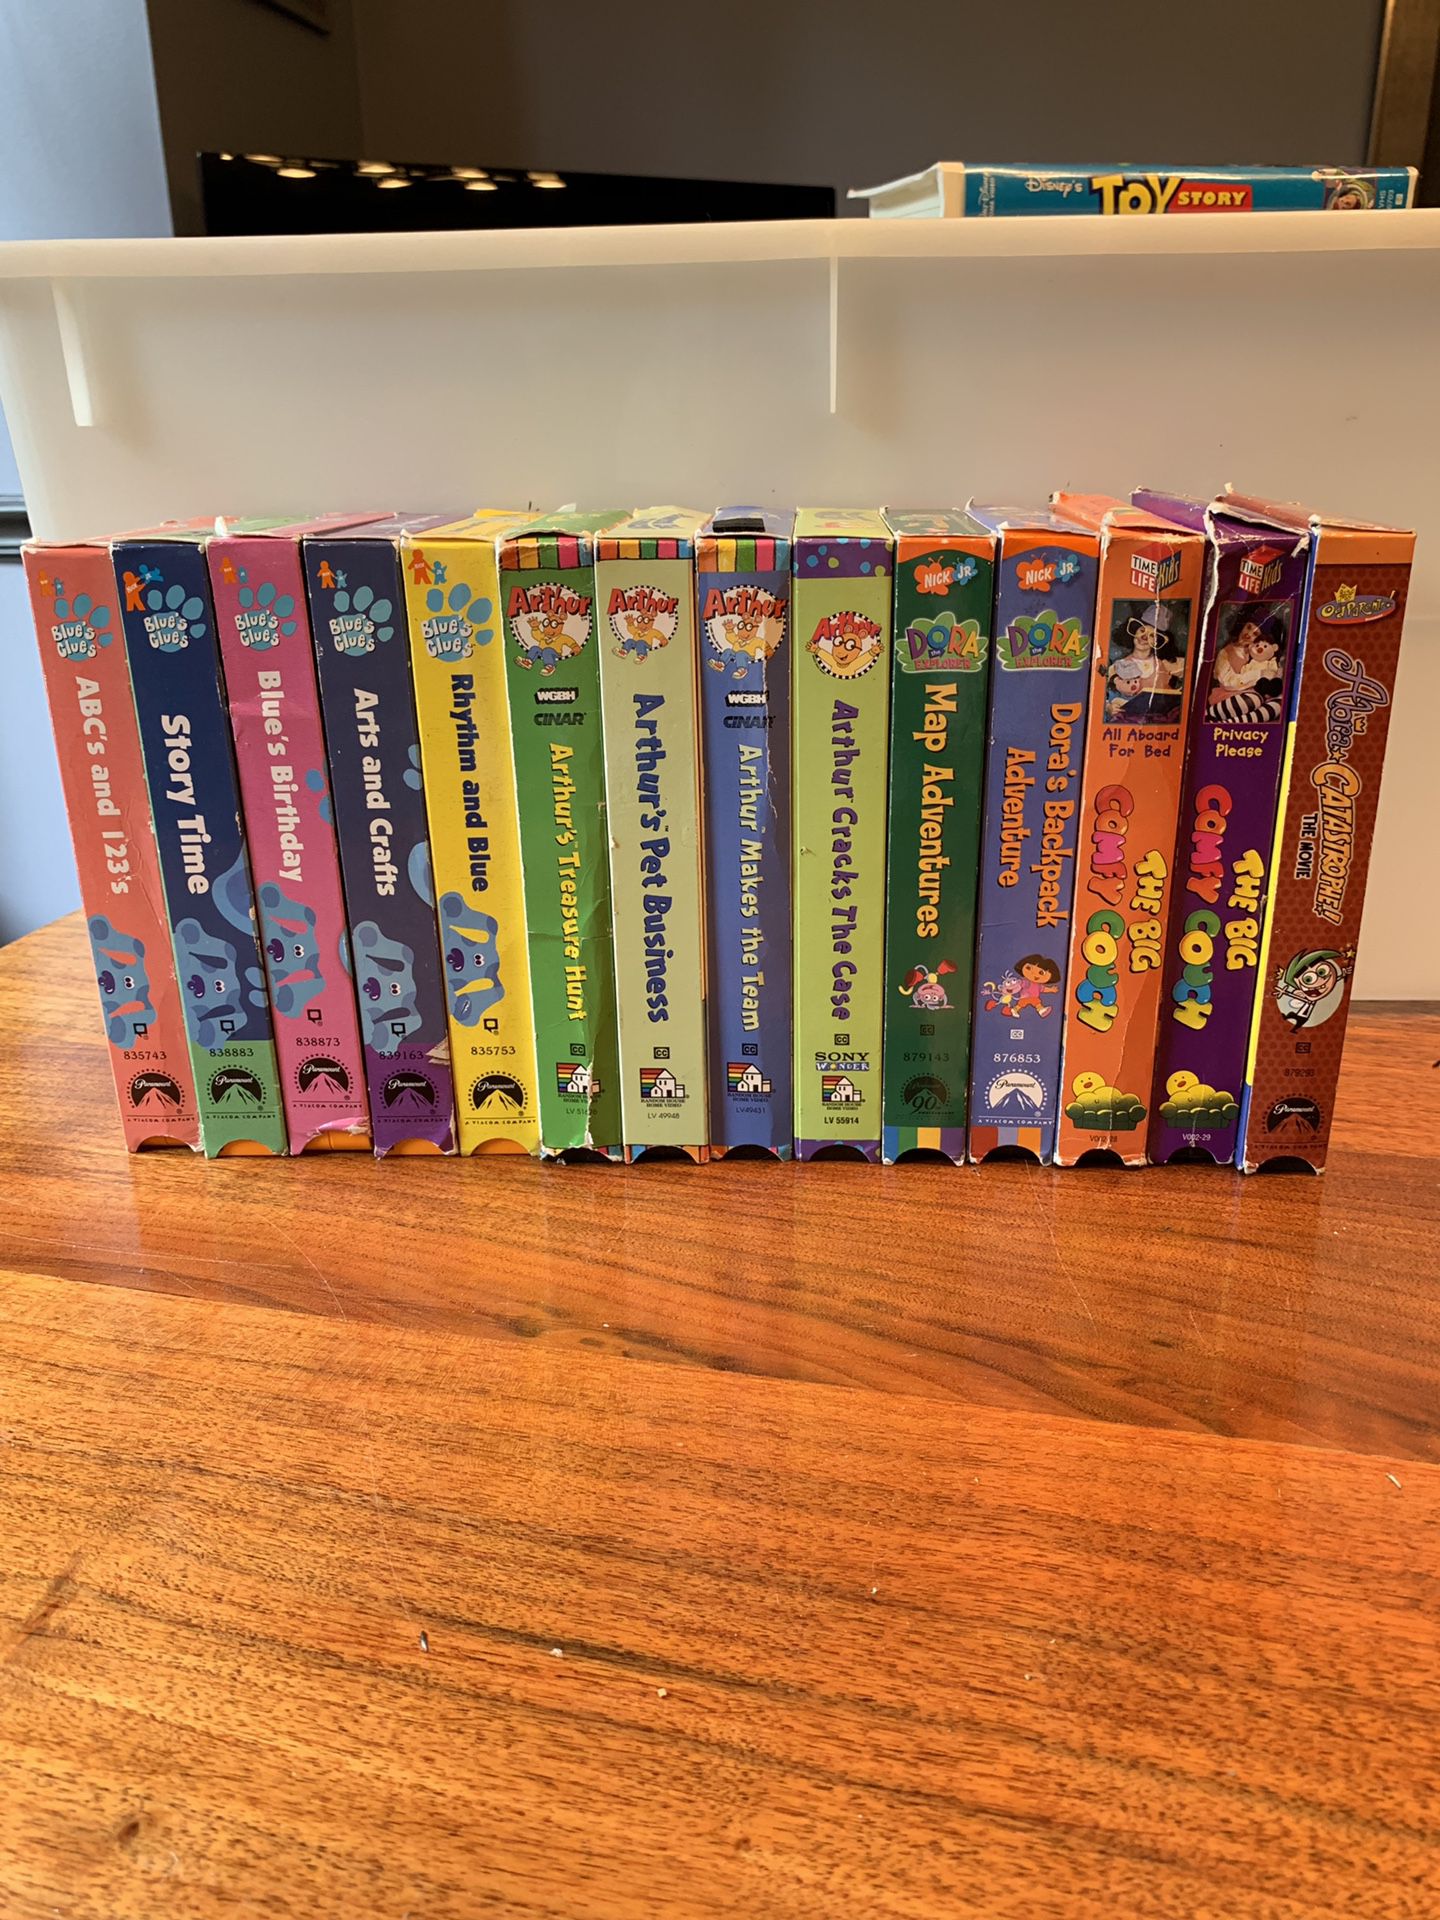 14 Kids VHS Tapes, Blues Clues, Arthur, Dora, Molly’s Comfy Couch